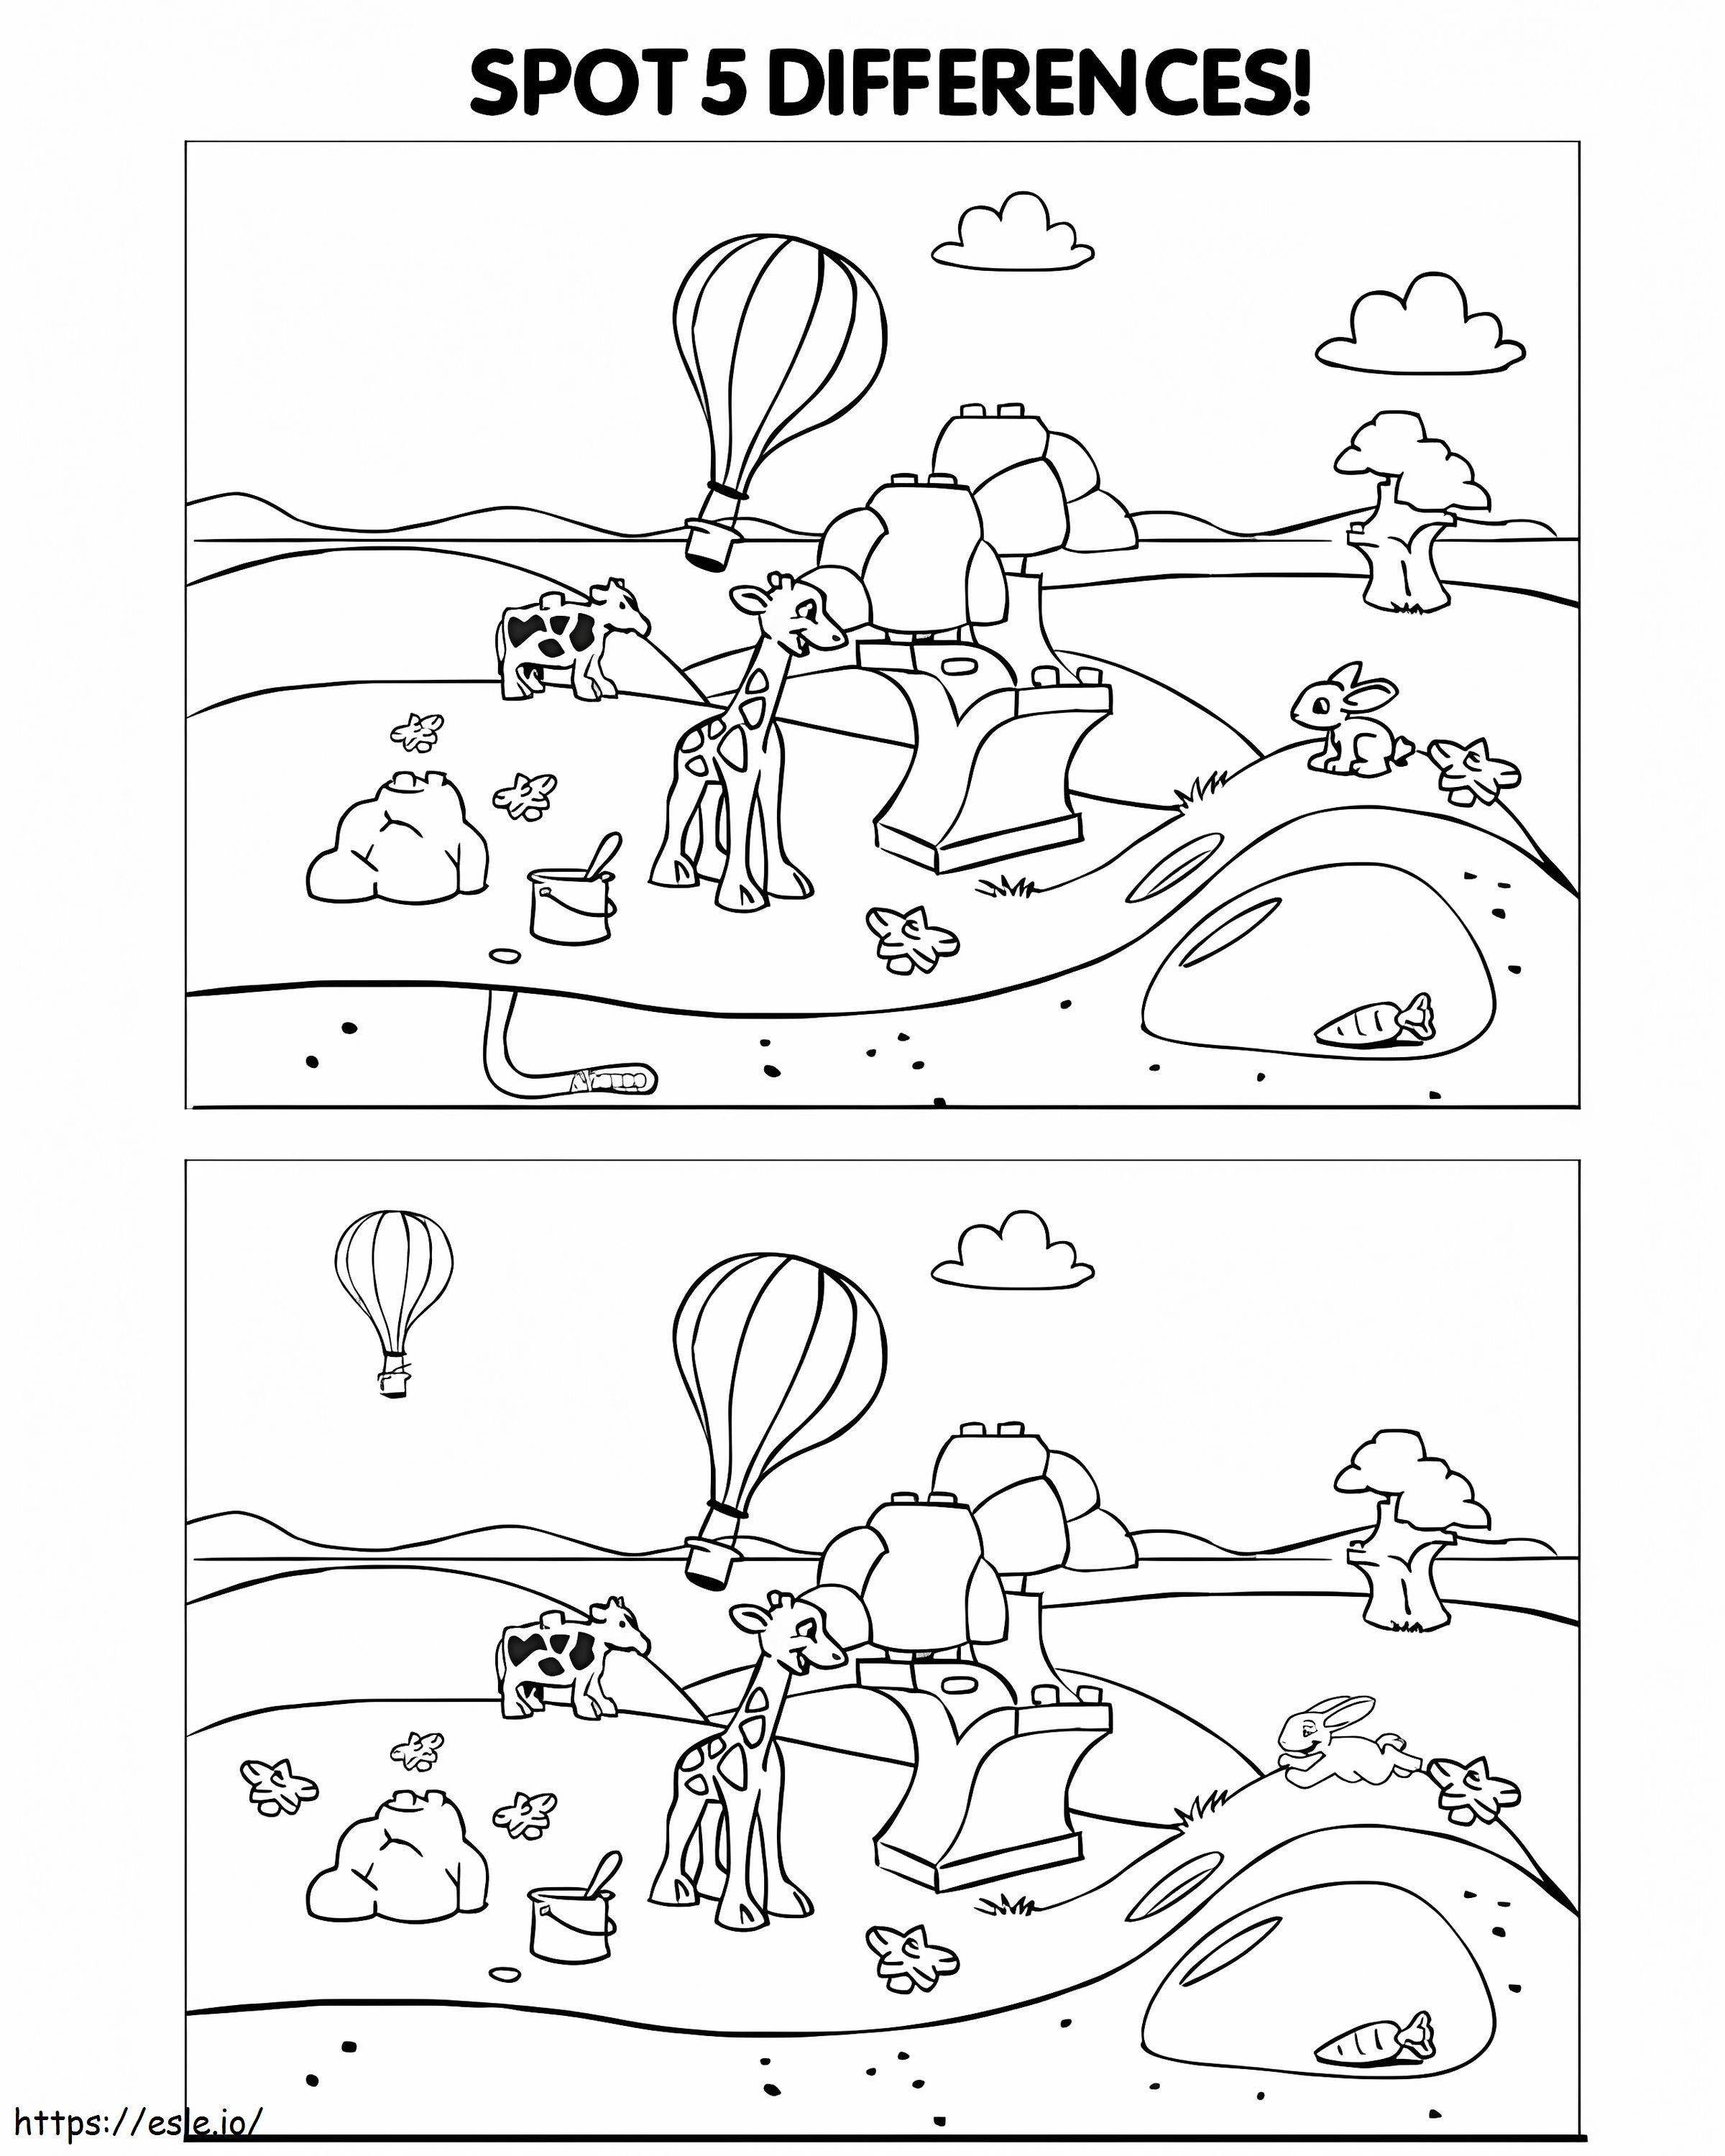 Spot 5 Differences coloring page